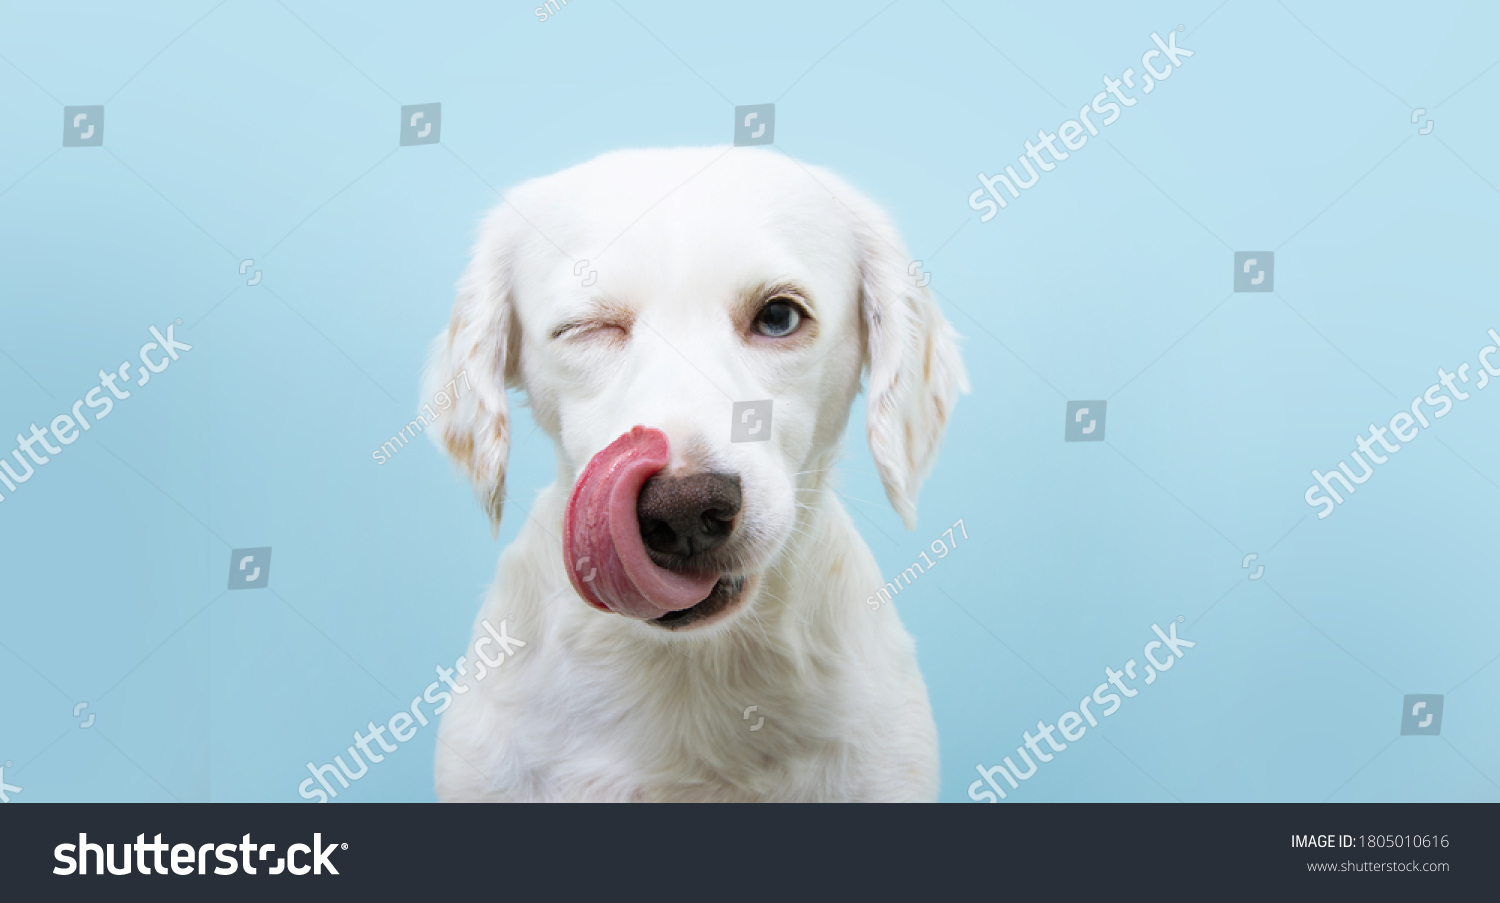 Hungry funny puppy dog licking its nose with tongue out and winking one eye closed. Isolated on blue colored background. #1805010616